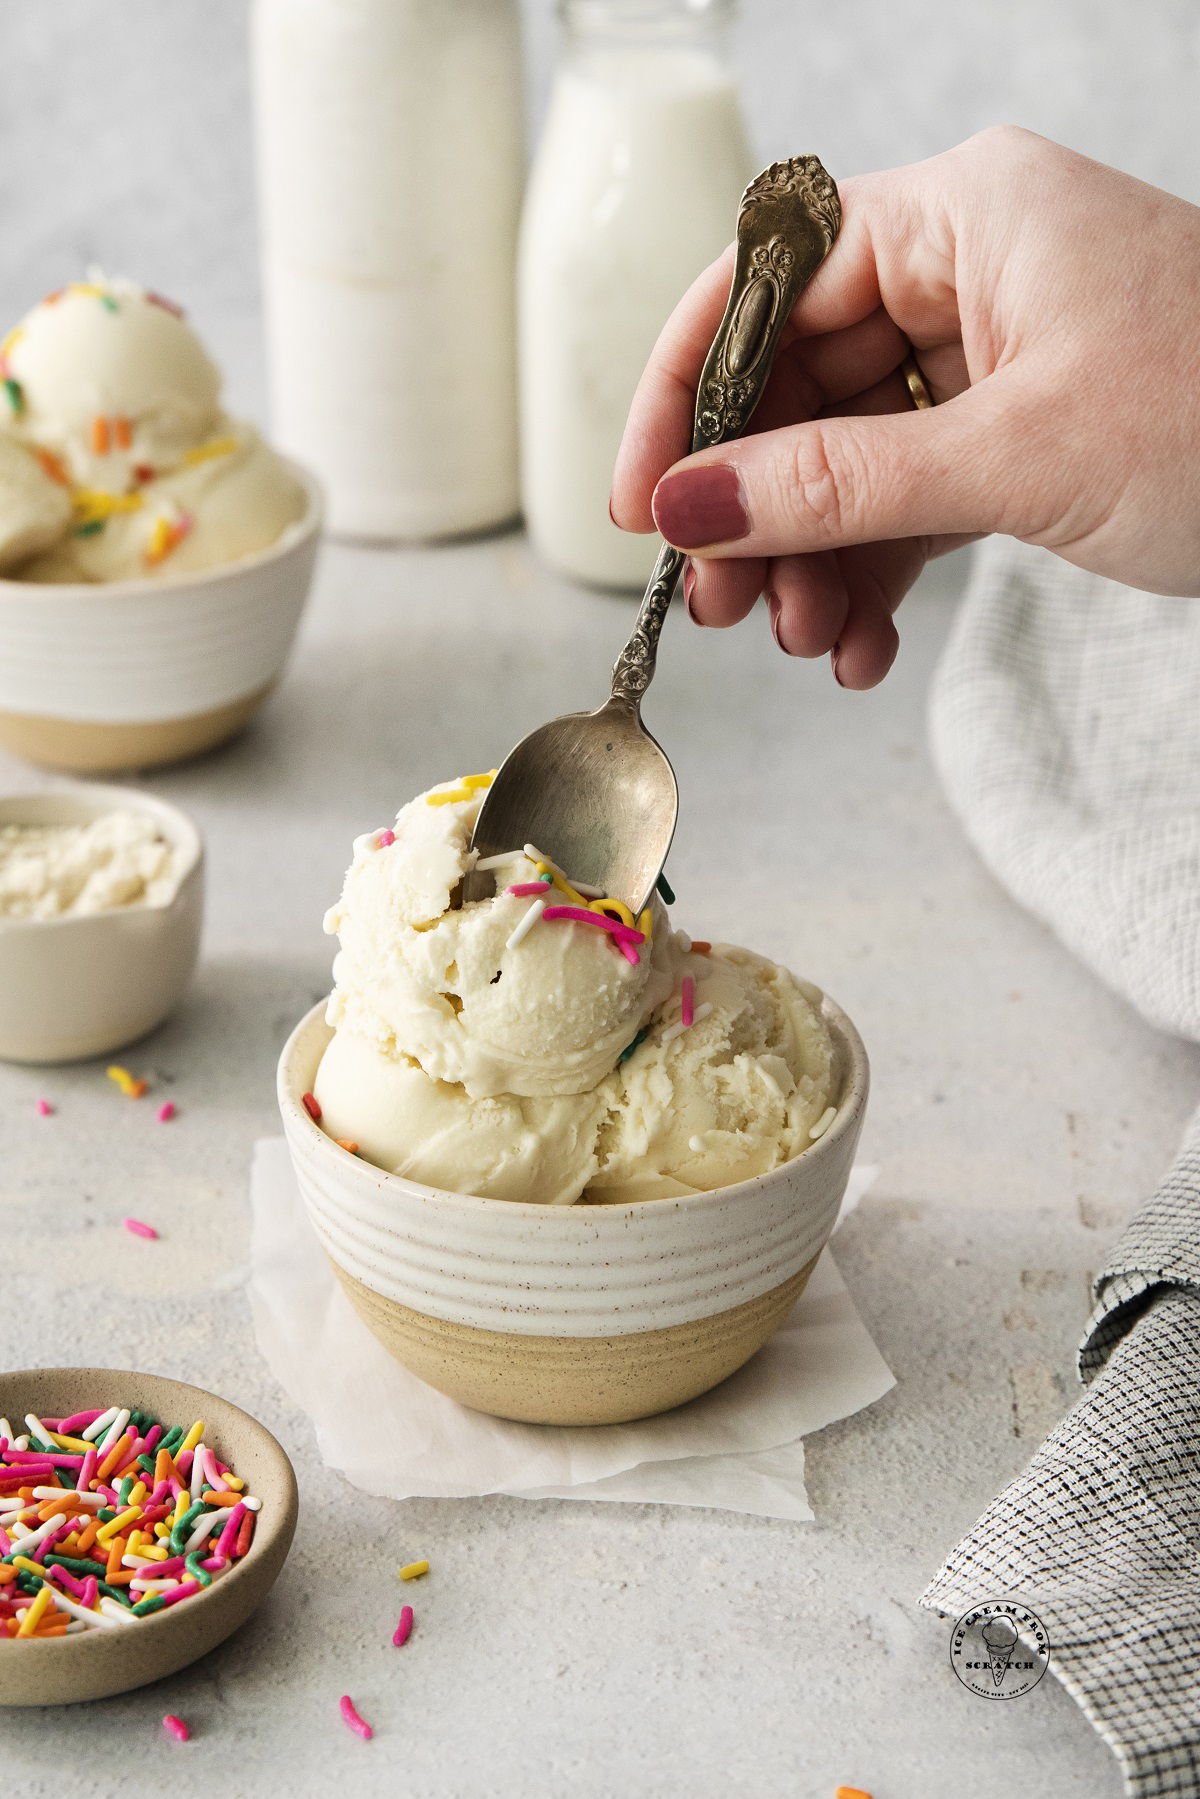 a hand holding a silver spoon, eating a bowl of protein ice cream with sprinkles.